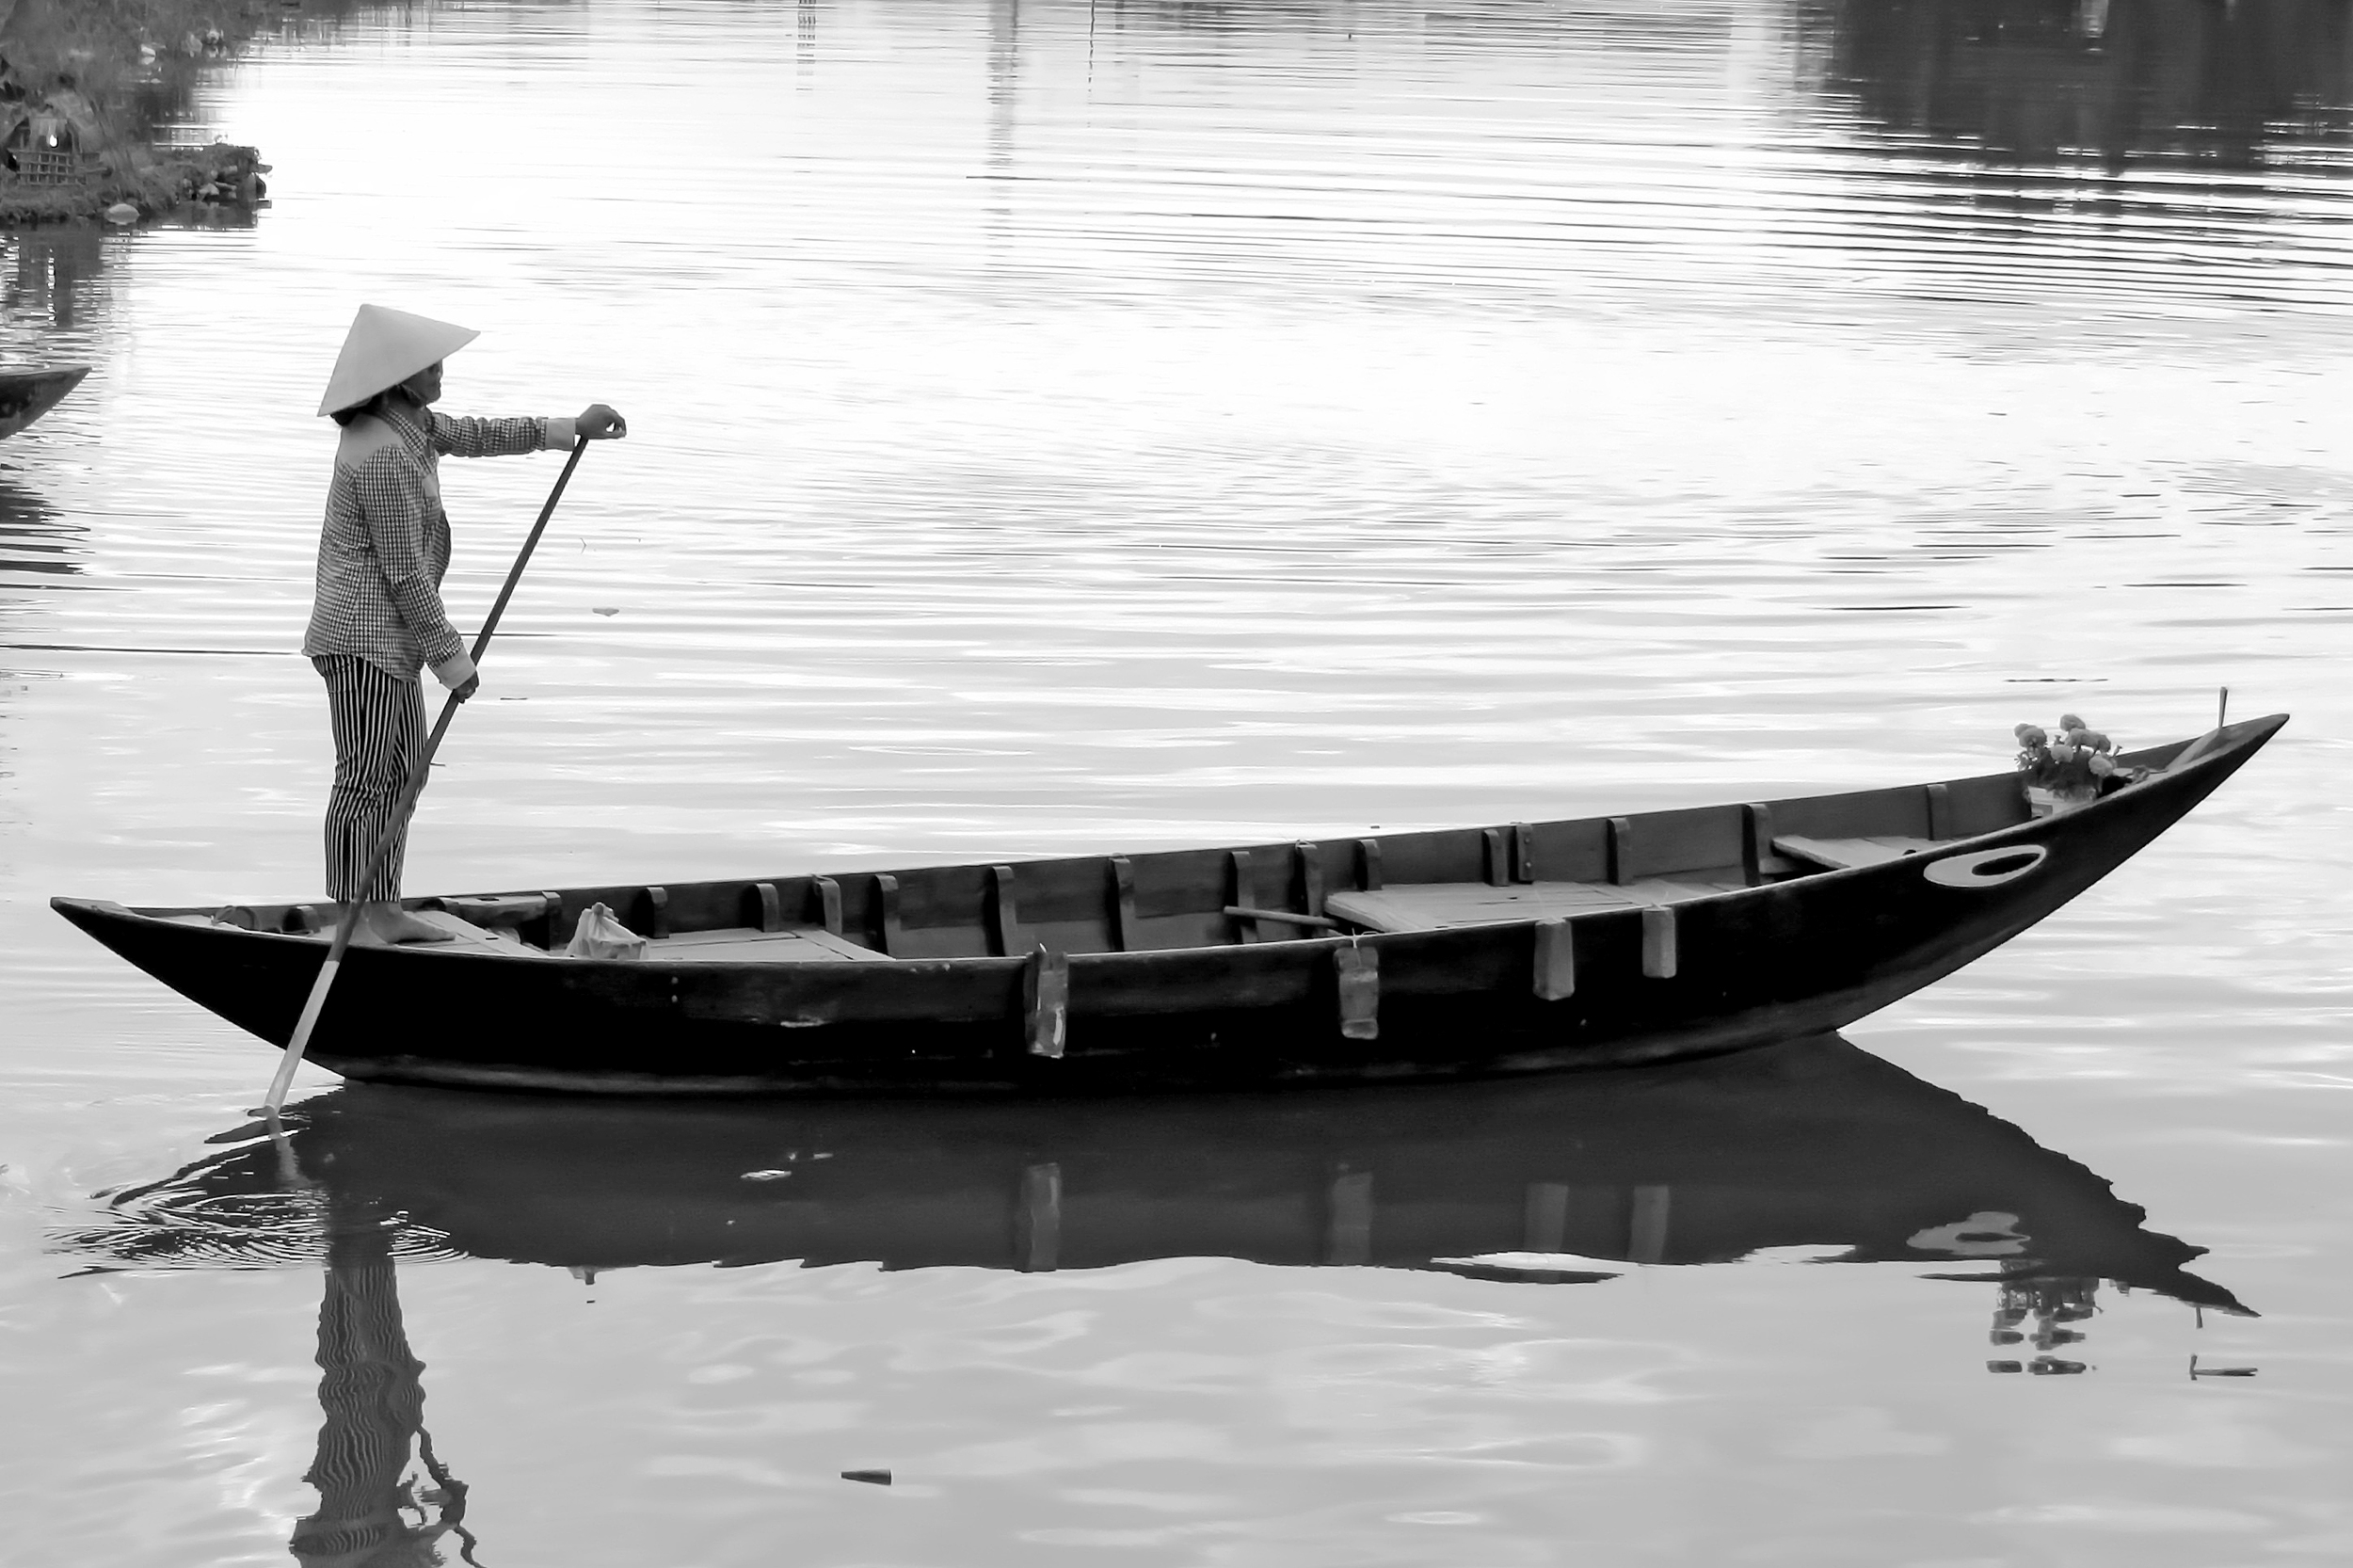 A woman punting a canoe